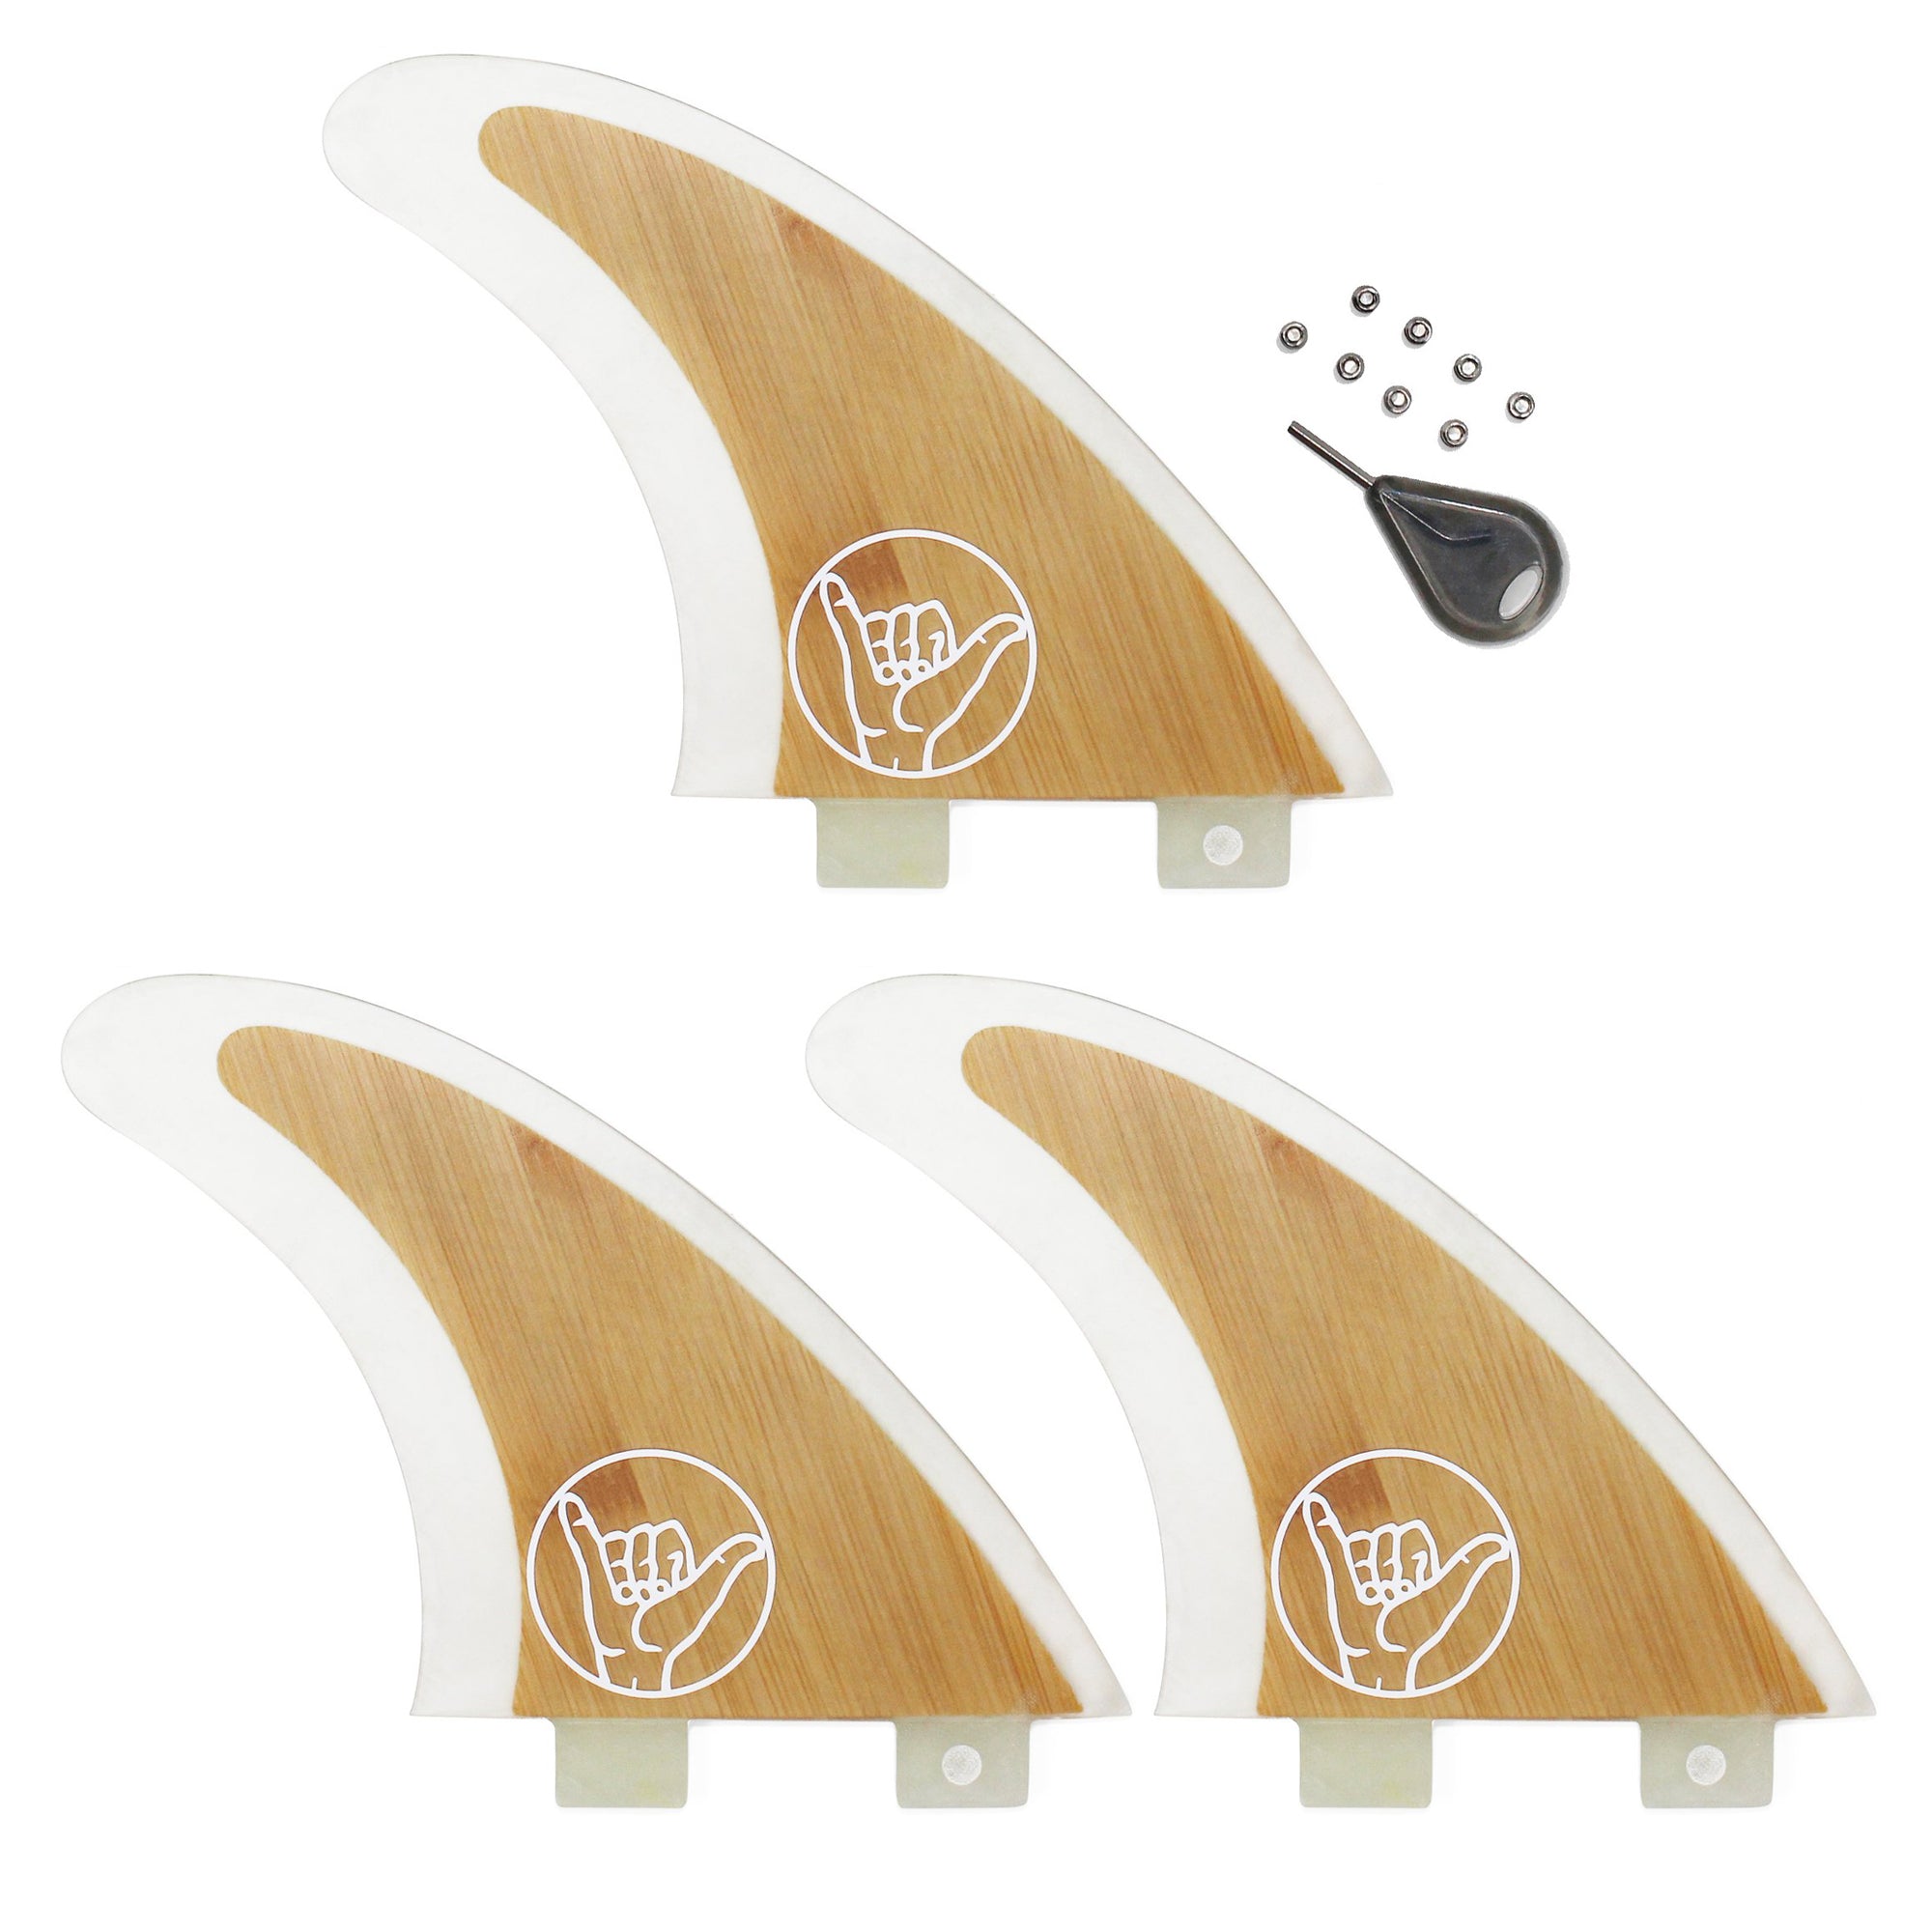 South Bay Board Co. FCS Surfboard Fins The Best Soft Top Surfboards in  the World